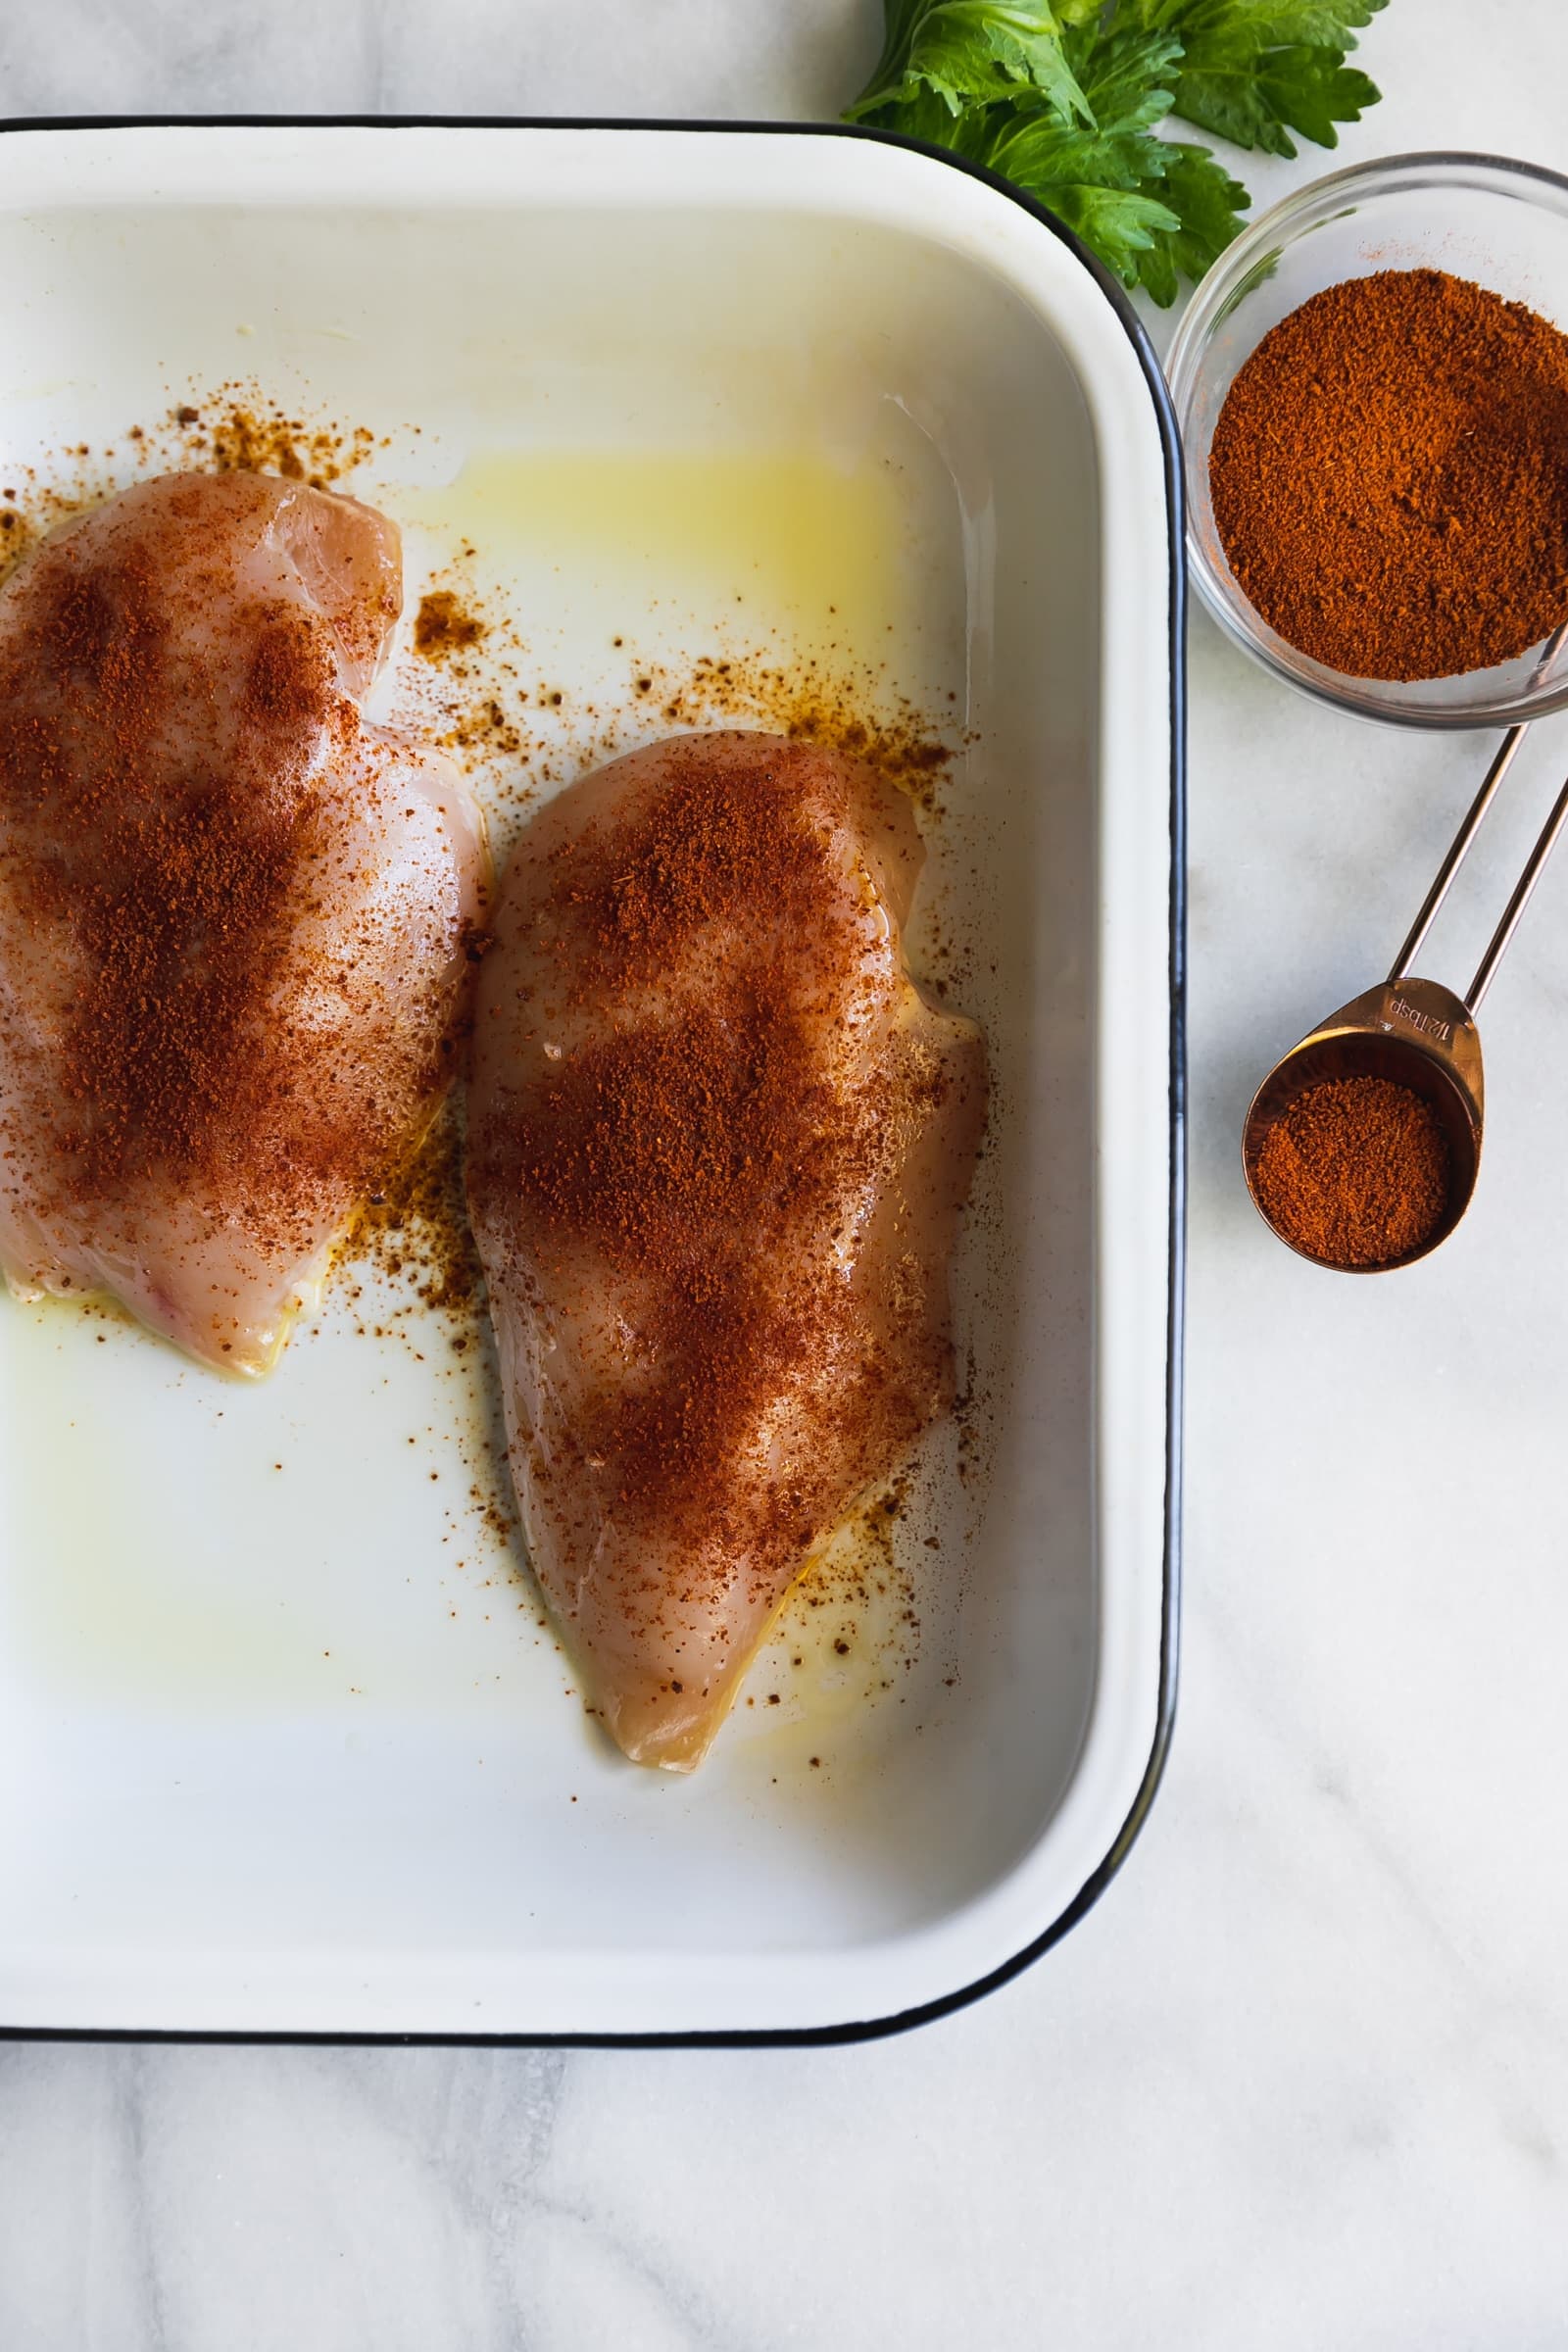 Tender, juicy chicken breasts made with a homemade smoky, savory and sweet spice rub. It's the ultimate weeknight dinner recipe!